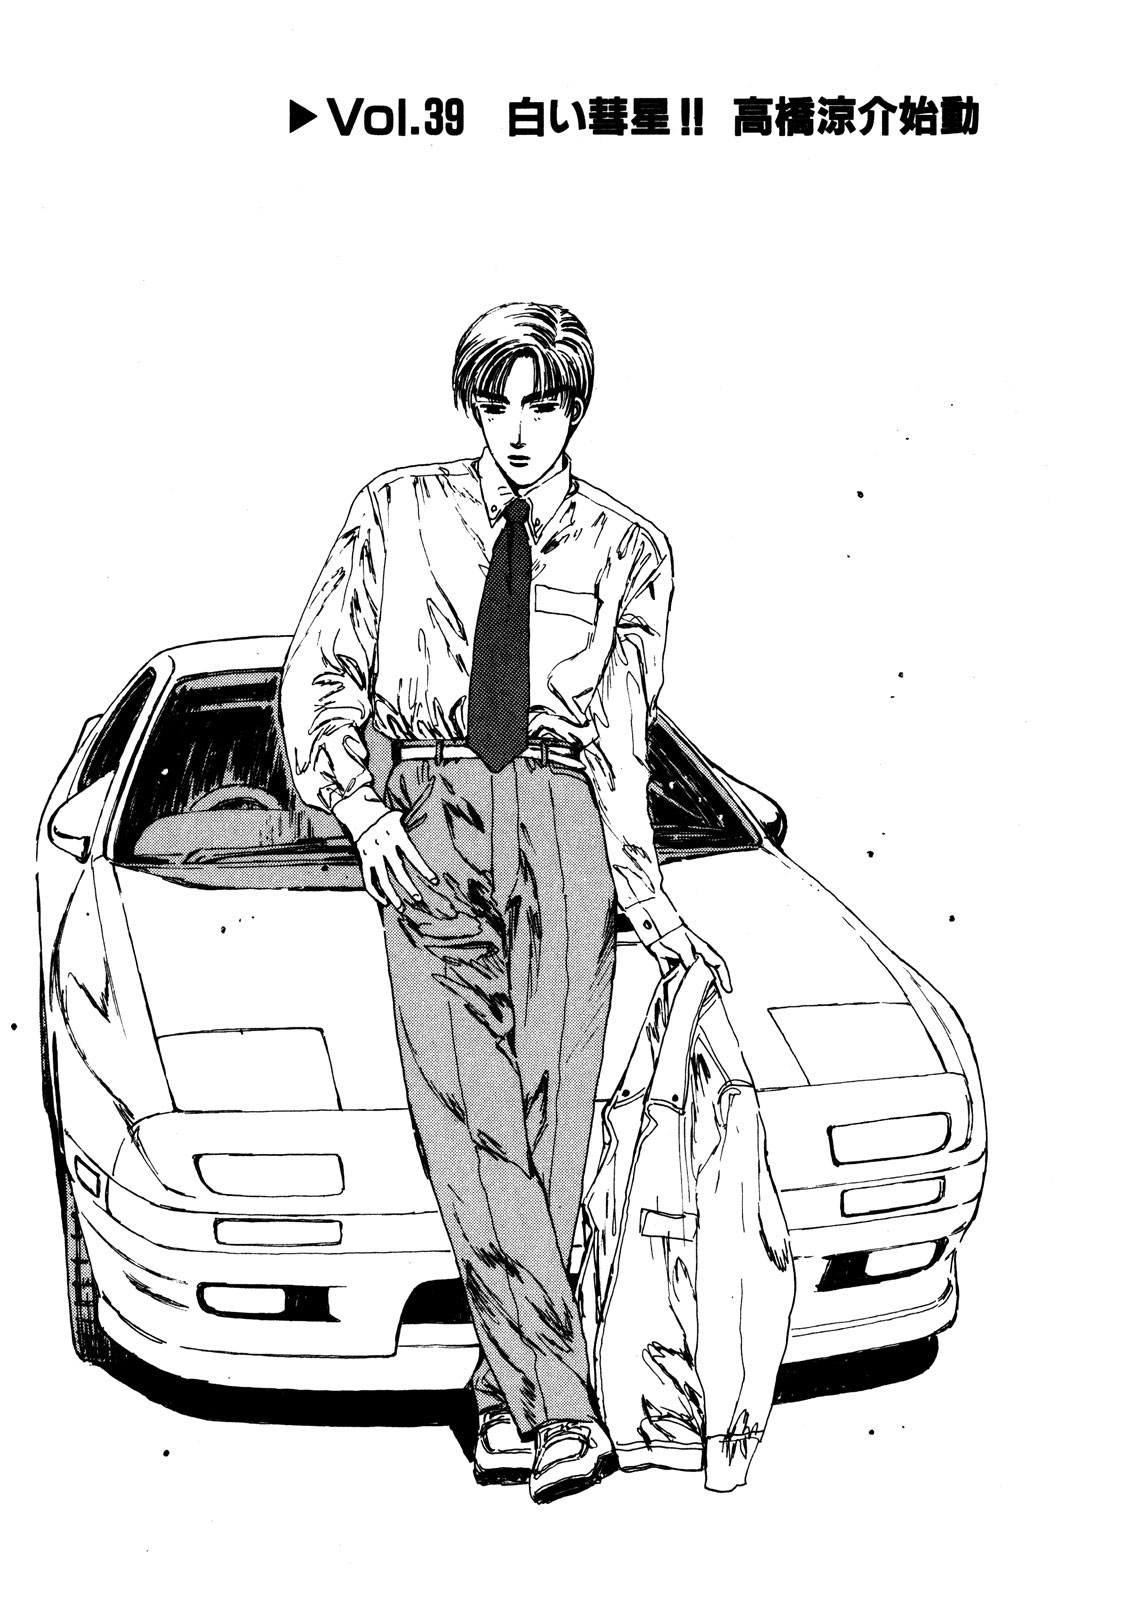 2019 Summer of Anime – Initial D